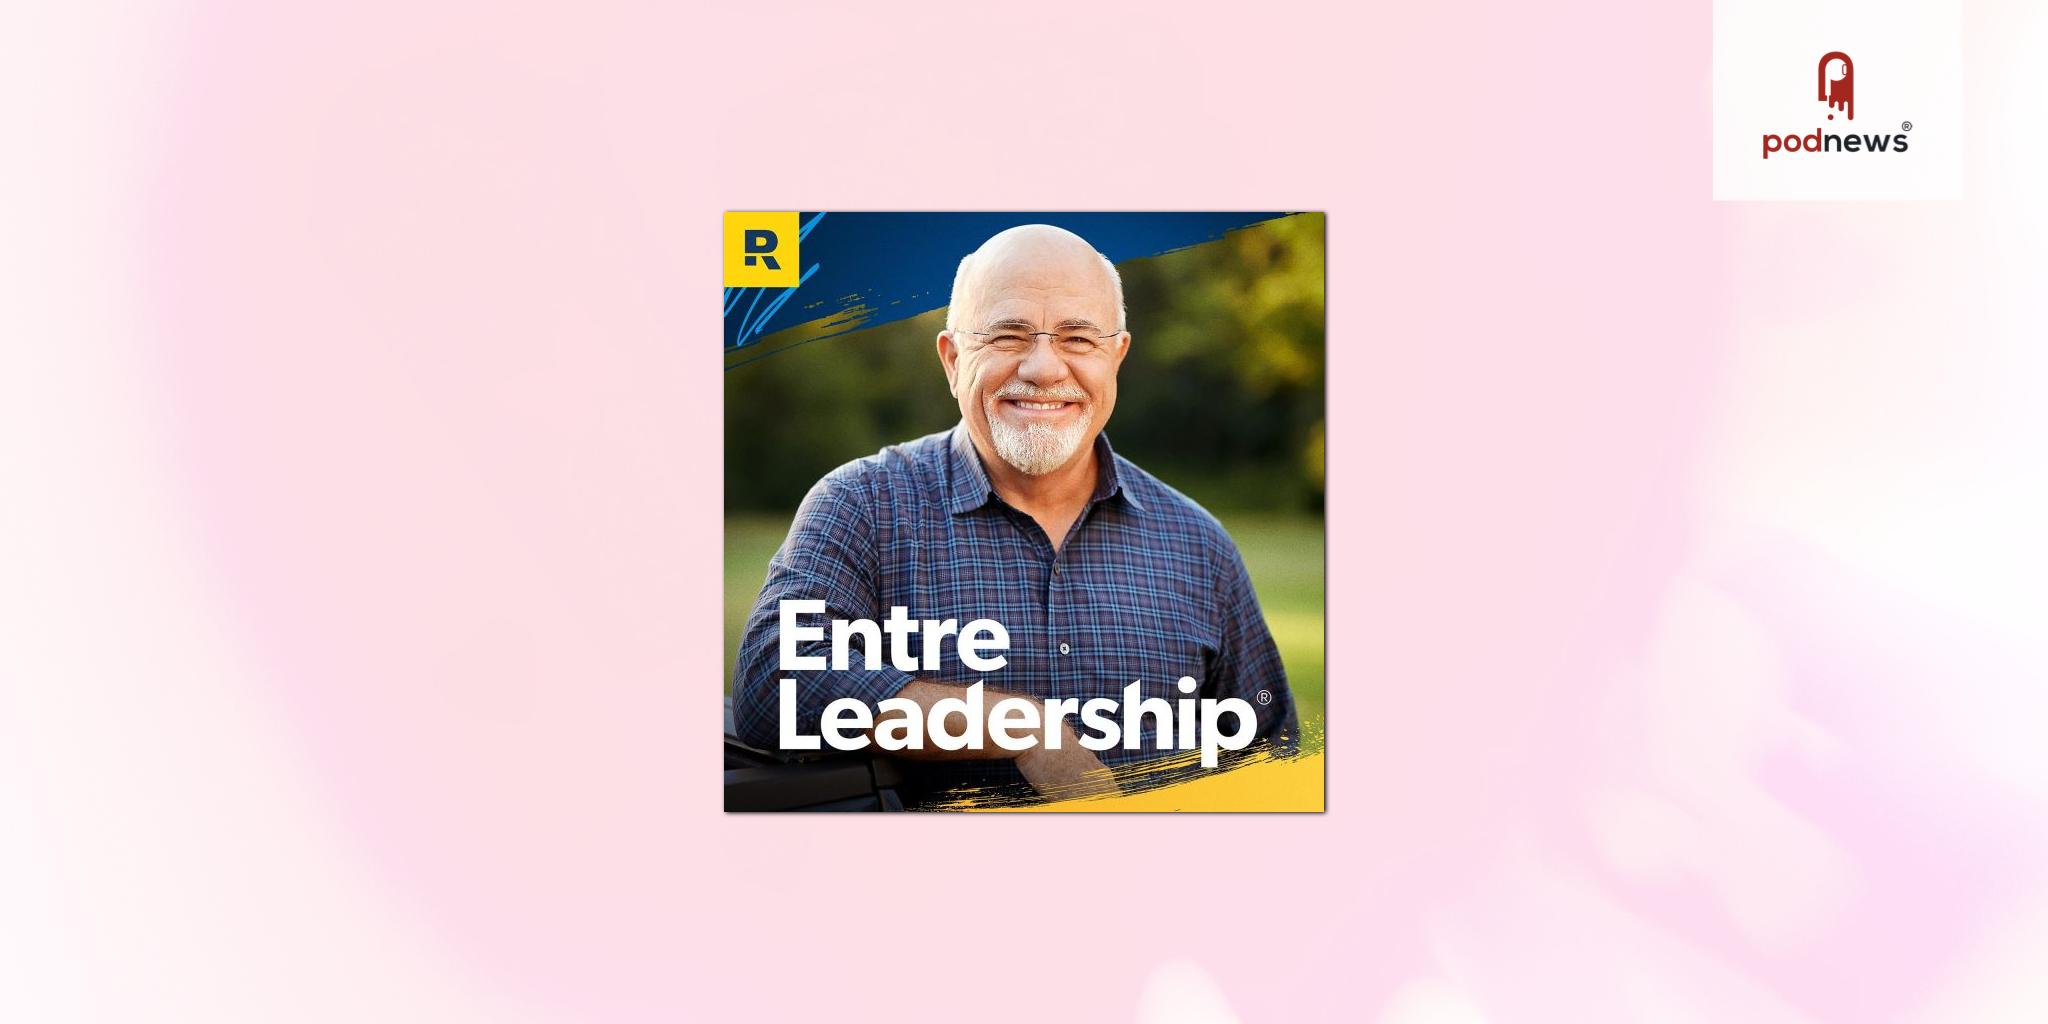 Dave Ramsey to host The Entreleadership Podcast